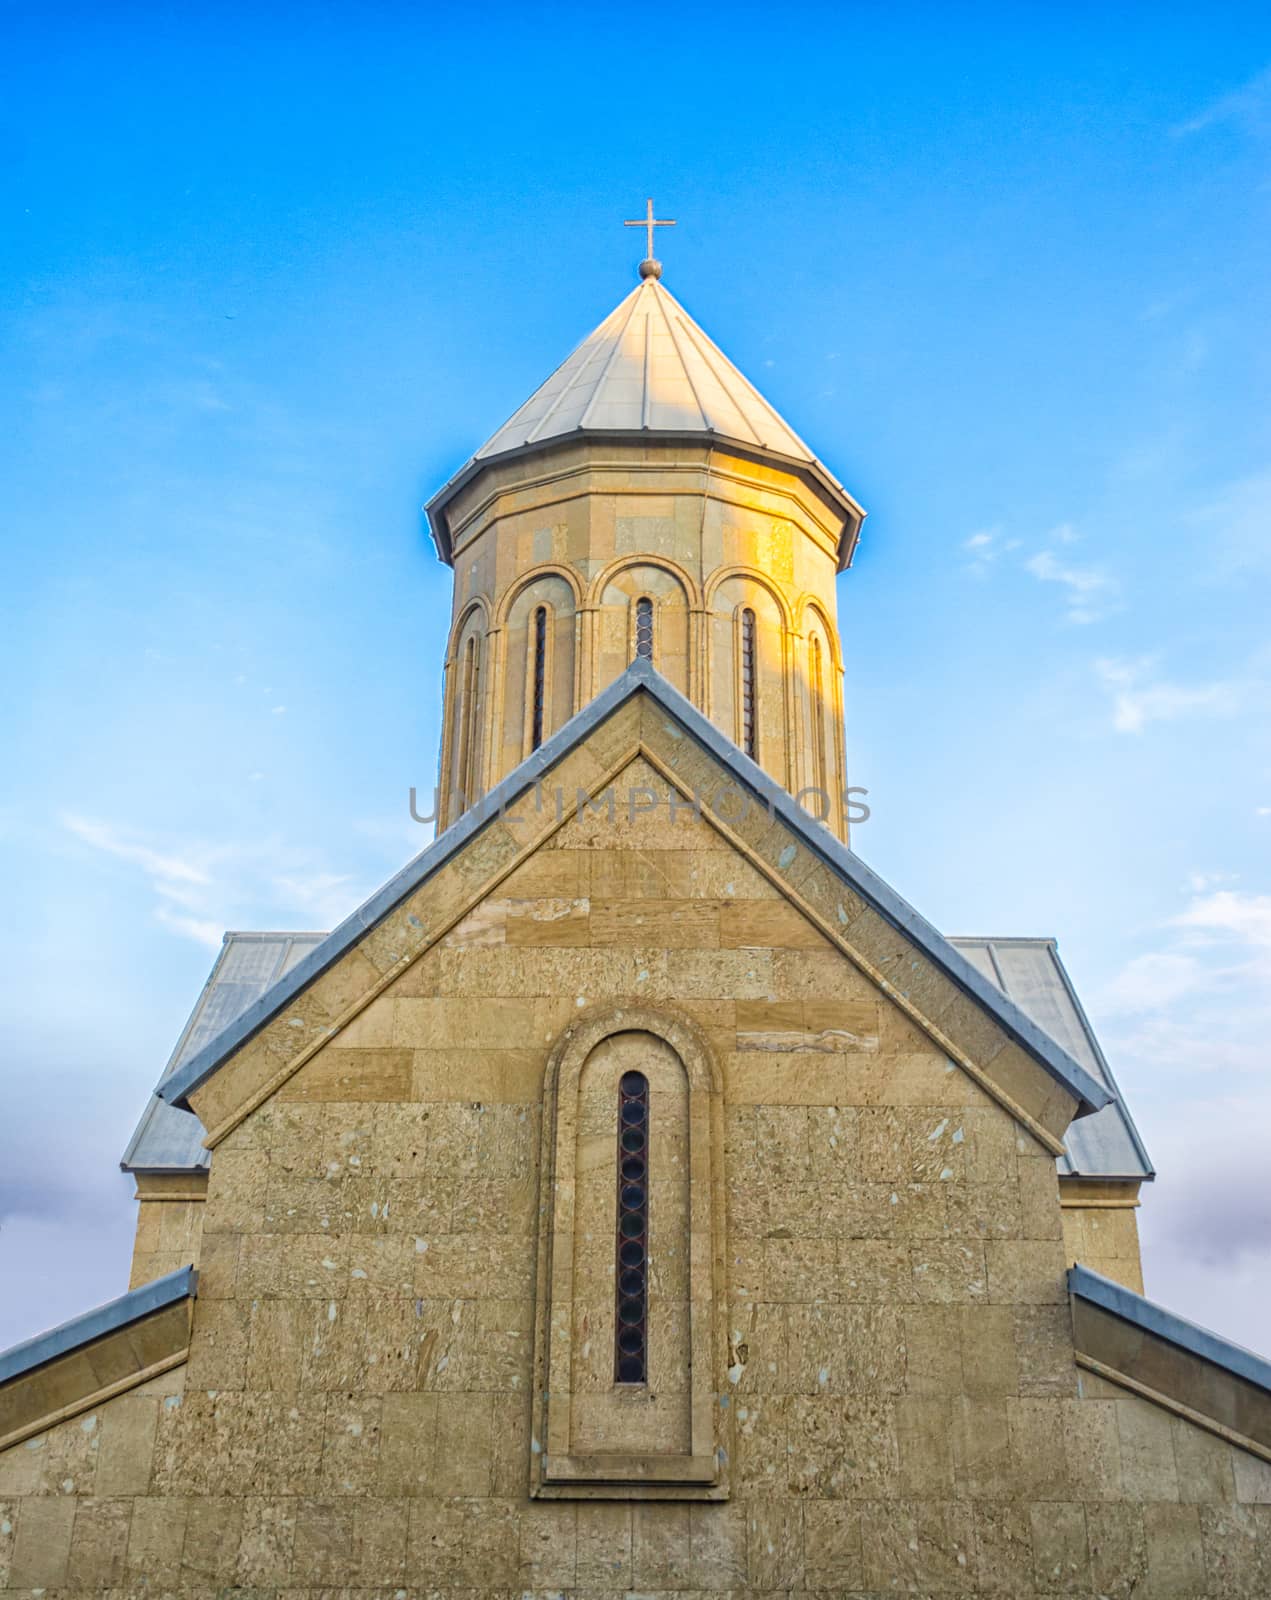 Temple of the Georgian Orthodox Church on a background of blue sky with clouds